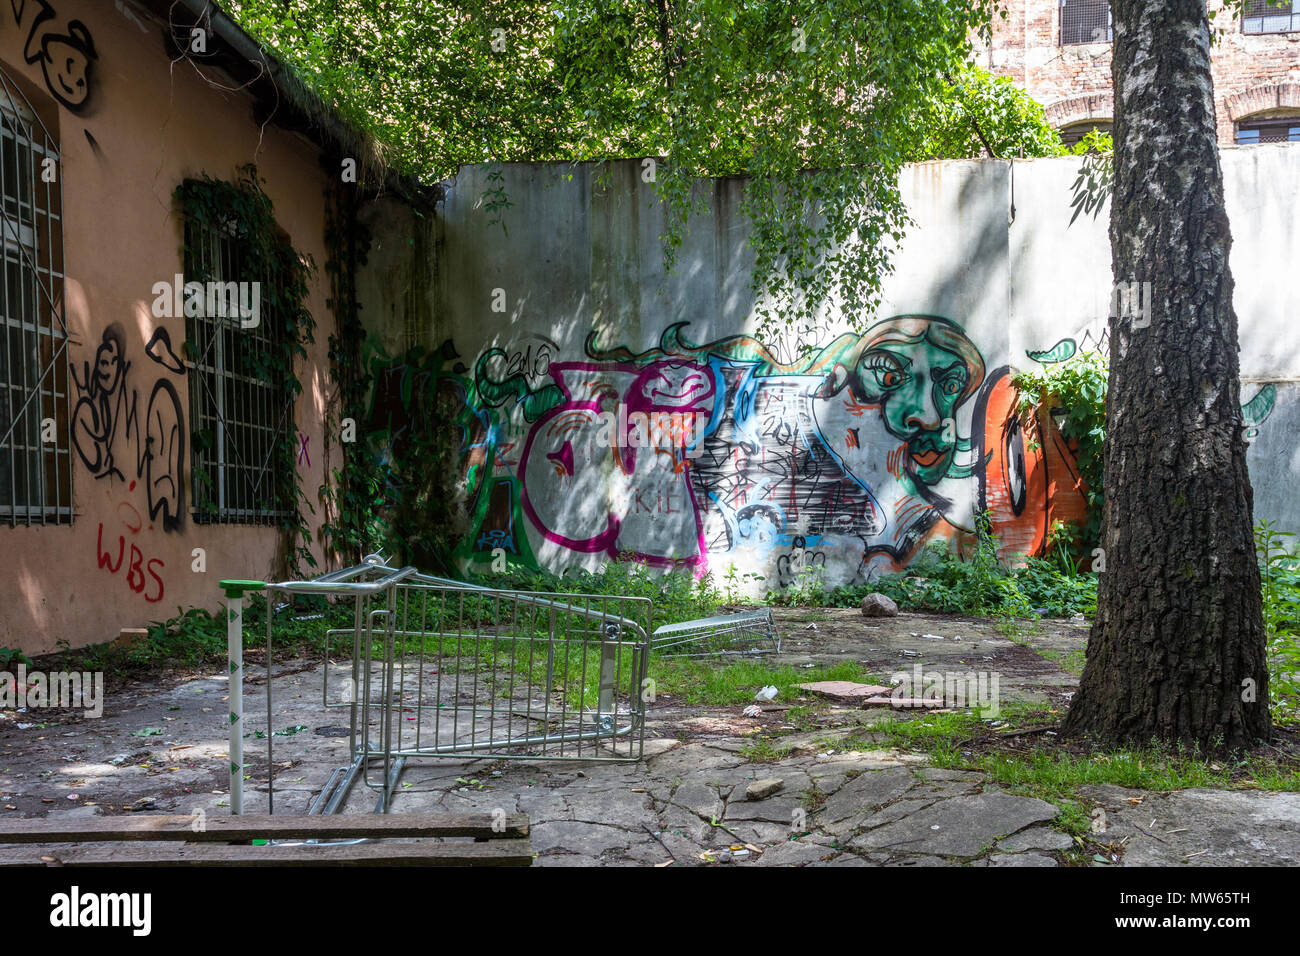 Abandoned shopping trolley in derelict courtyard in Lodz, Poland. Stock Photo